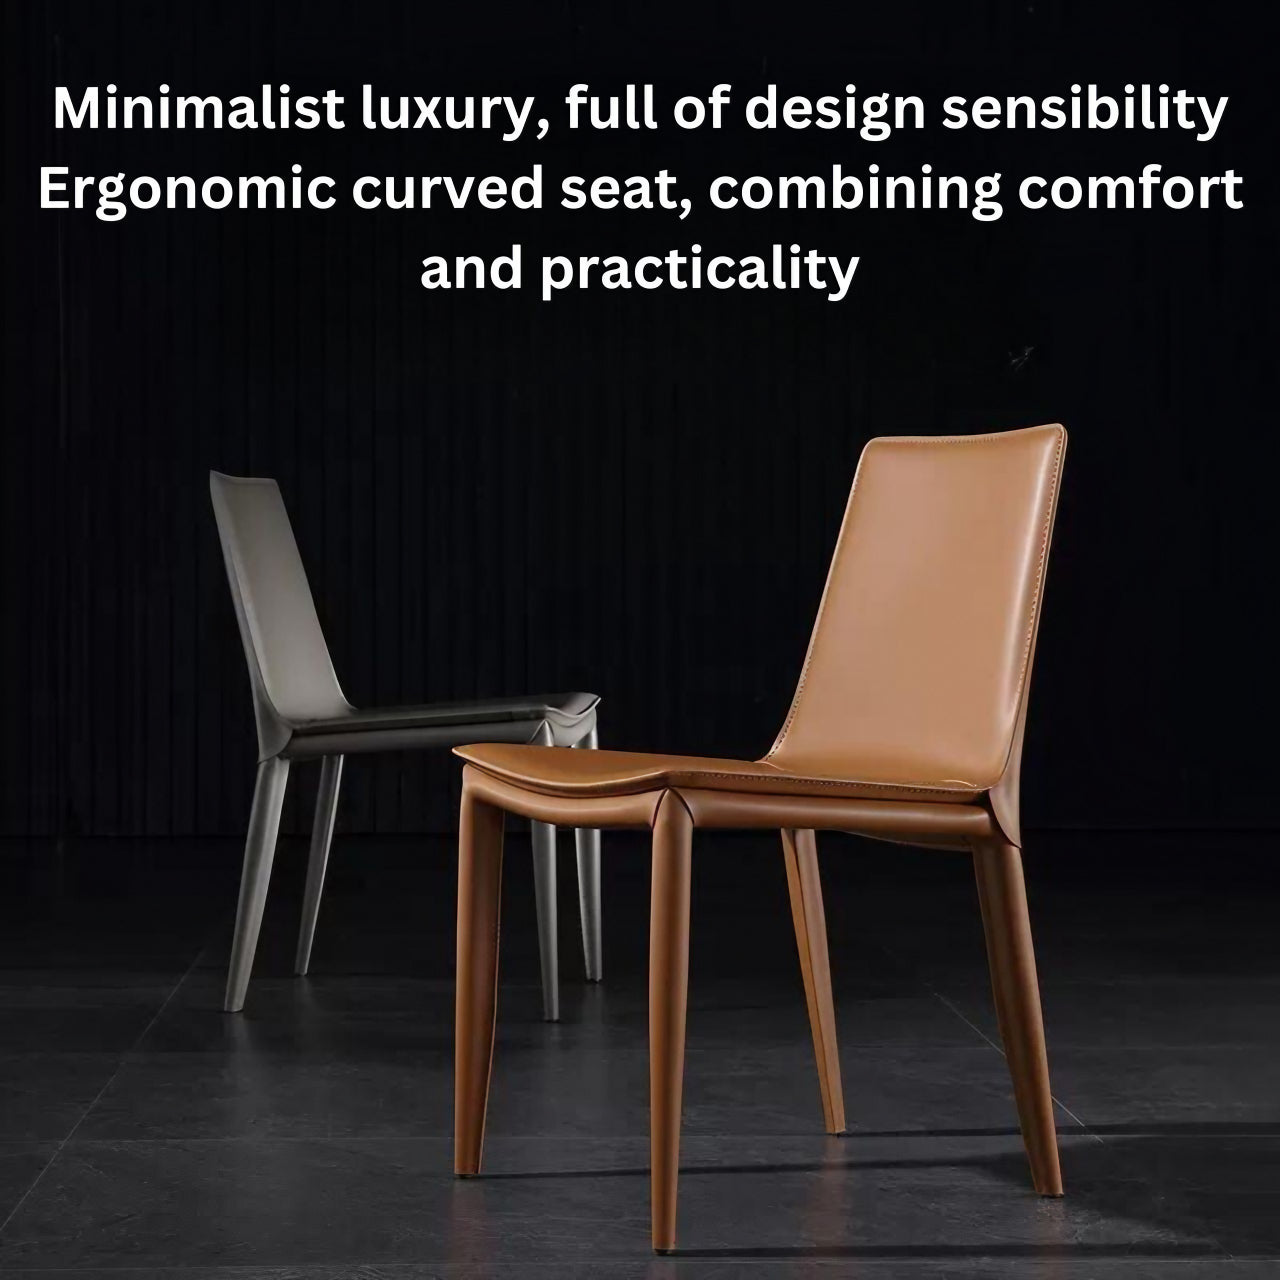 Sophisticated single leather dining chair with a minimalist carbon steel frame